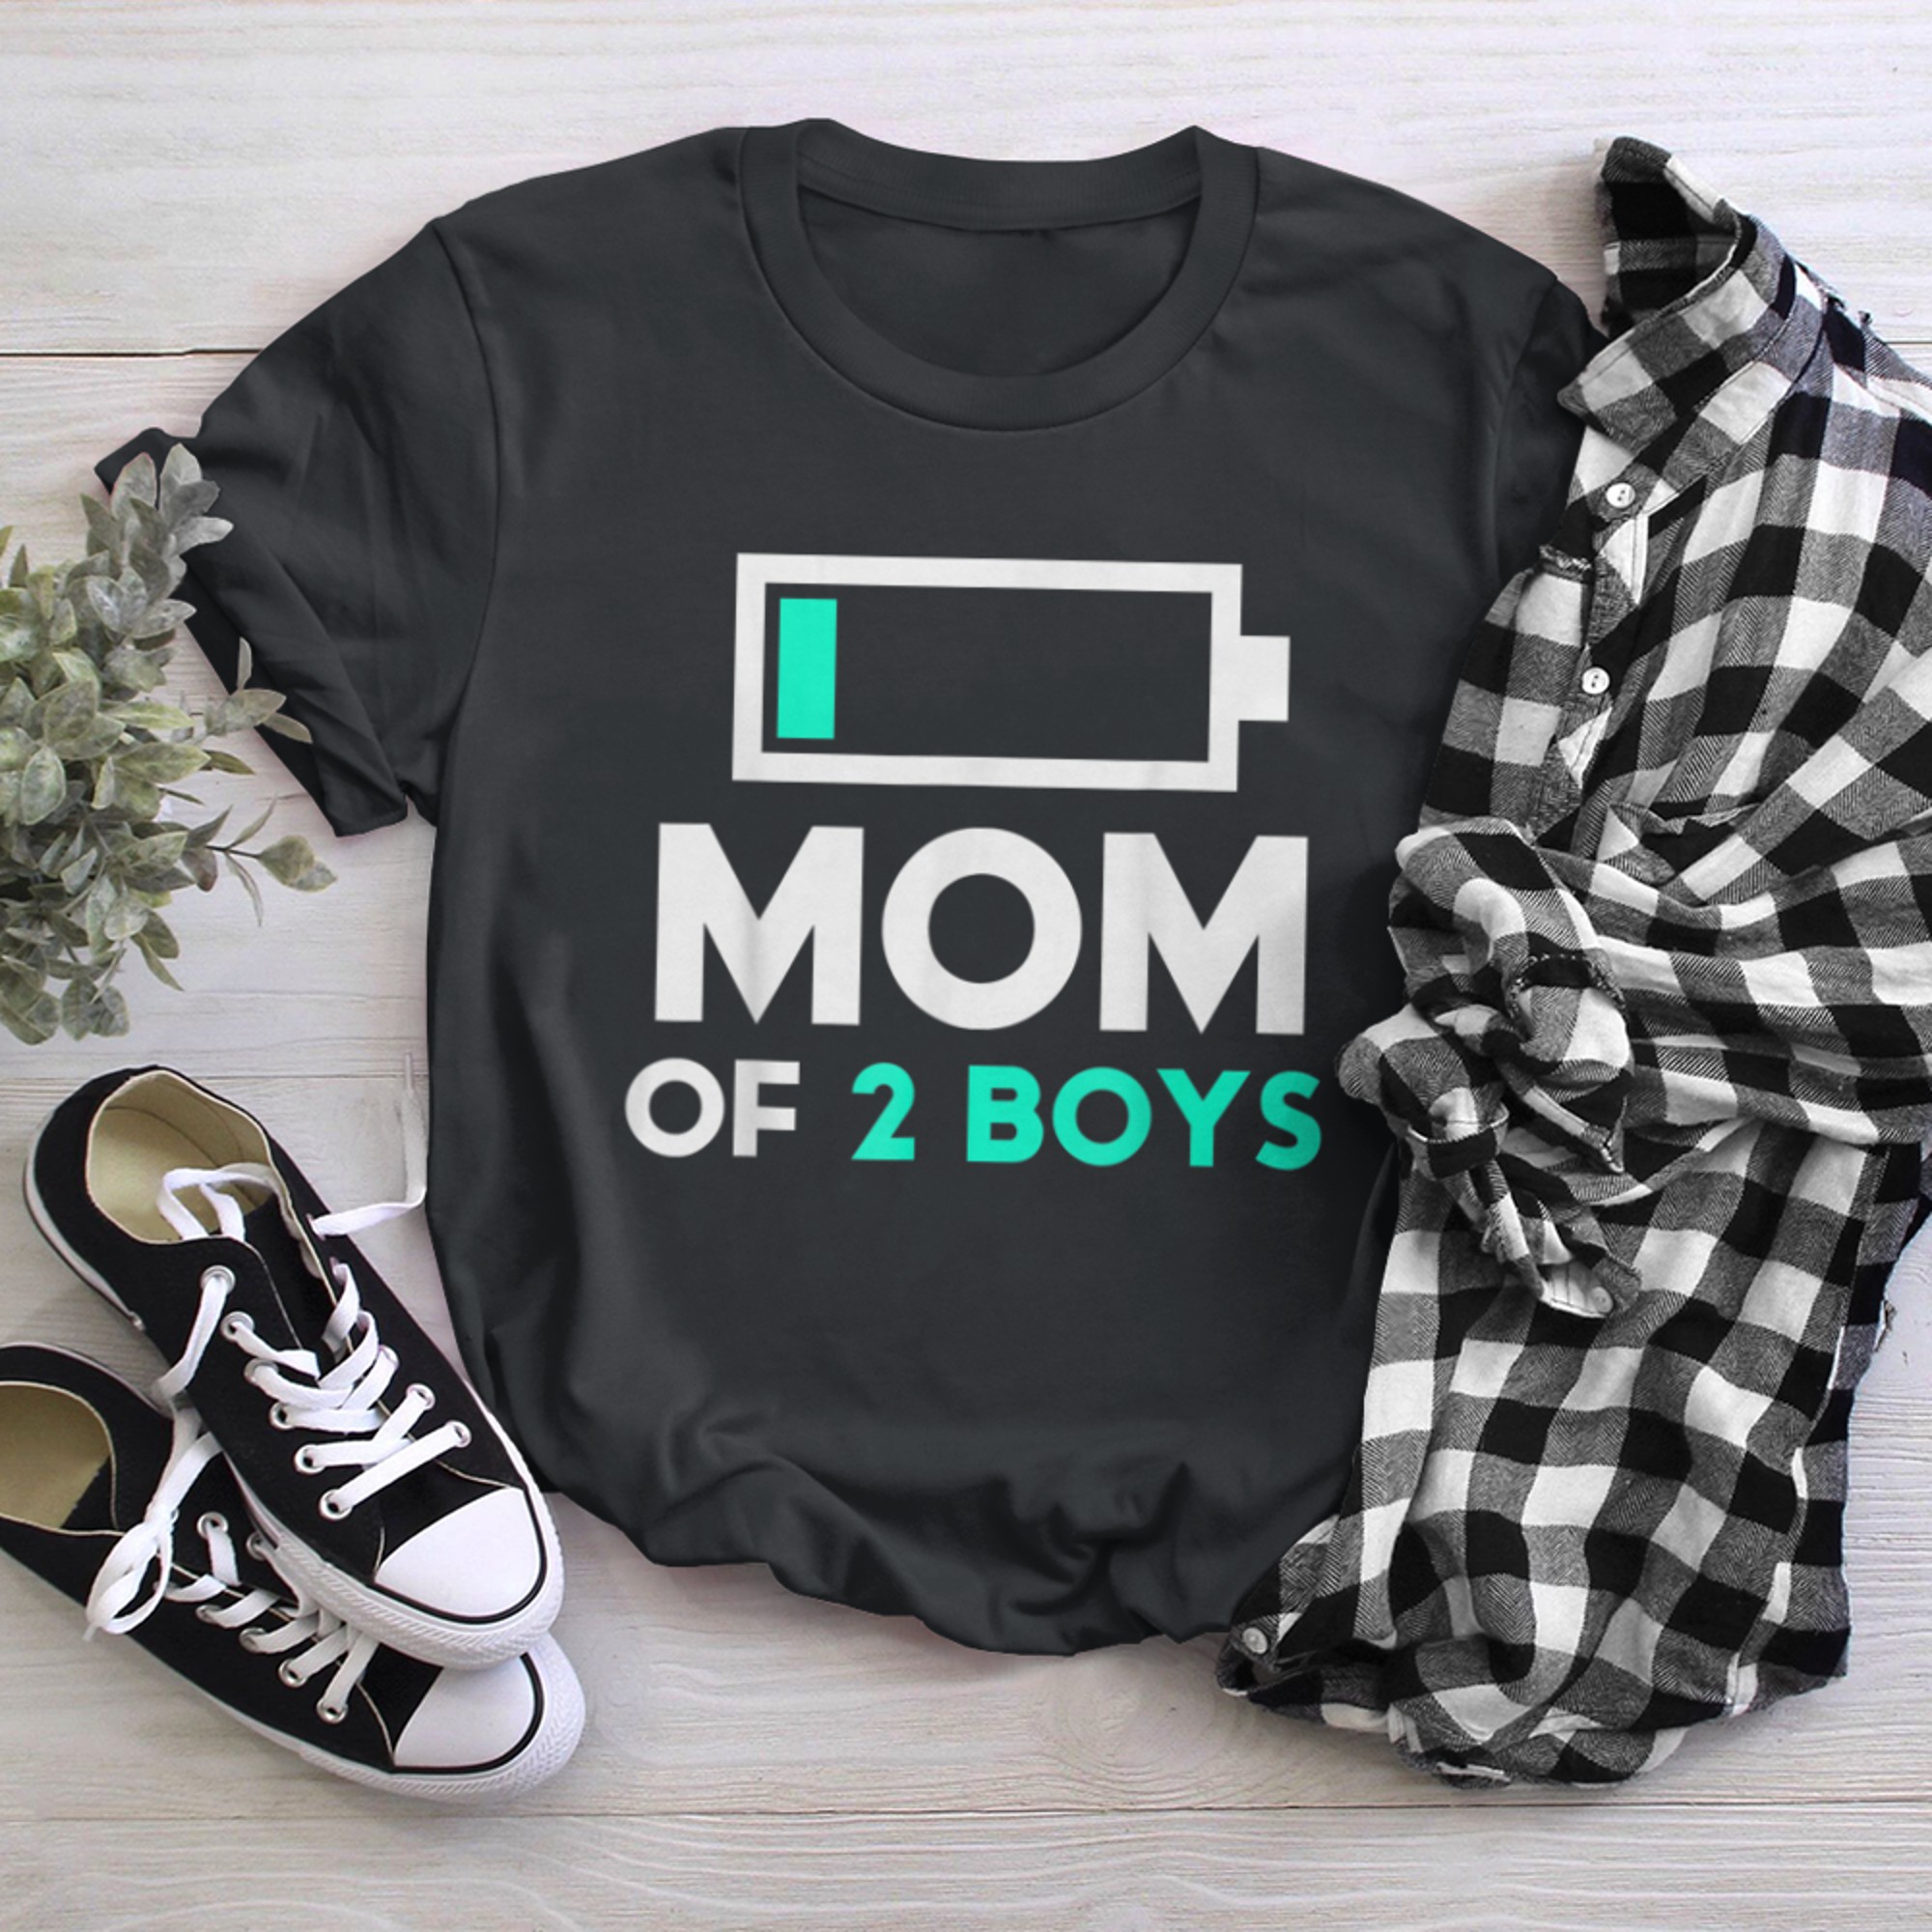 Mom of from Son to Mothers Day Birthday t-shirt black